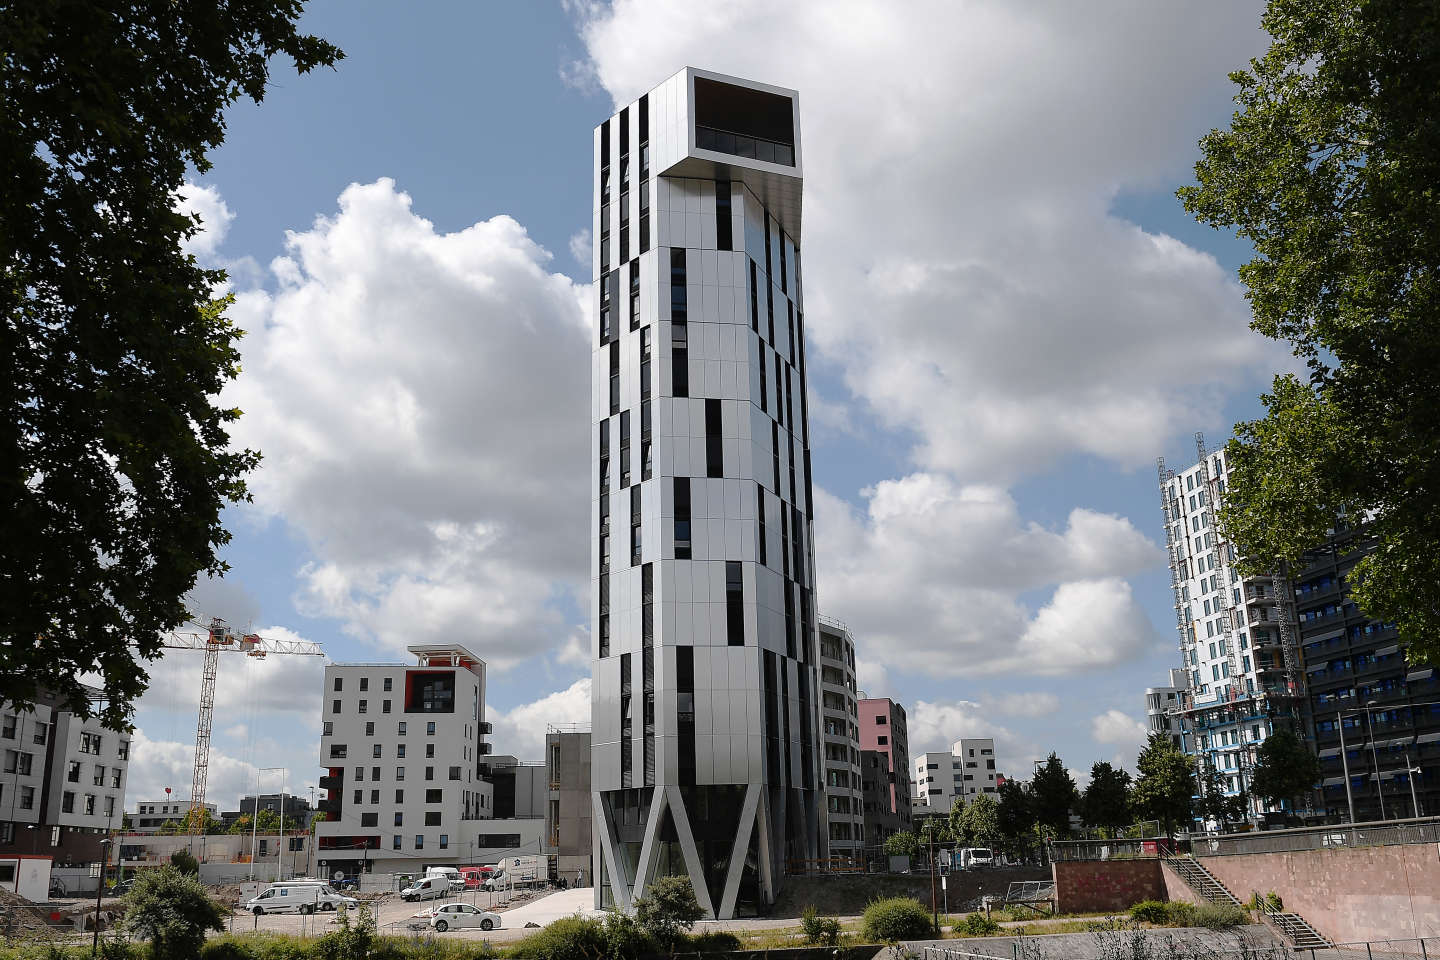 In Strasbourg, the first positive energy residential tower shows its limits